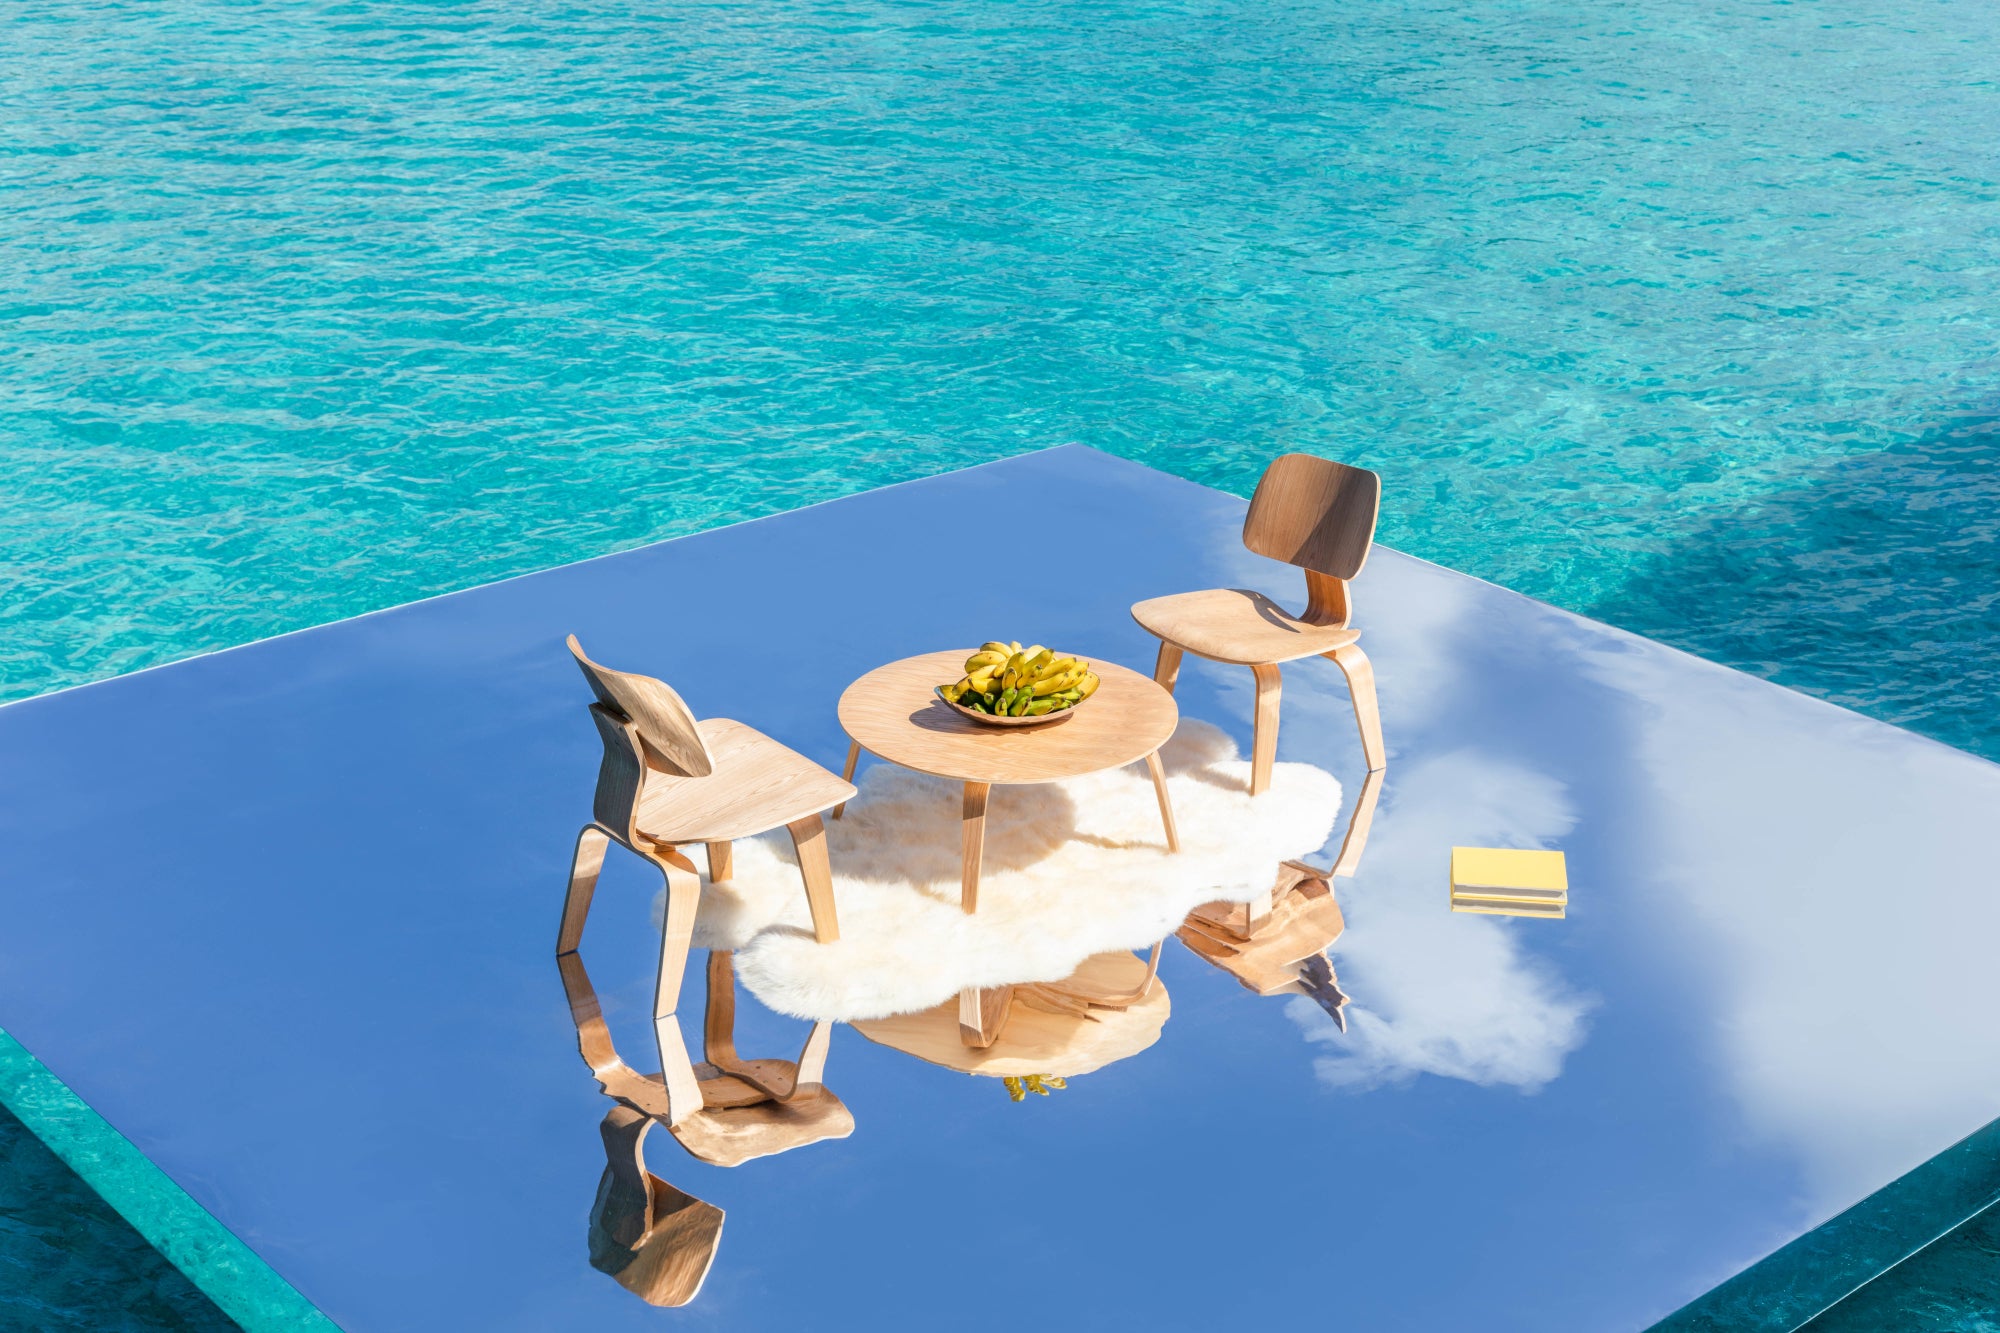 Eames Molded Table and Chairs Reflection, Bora Bora